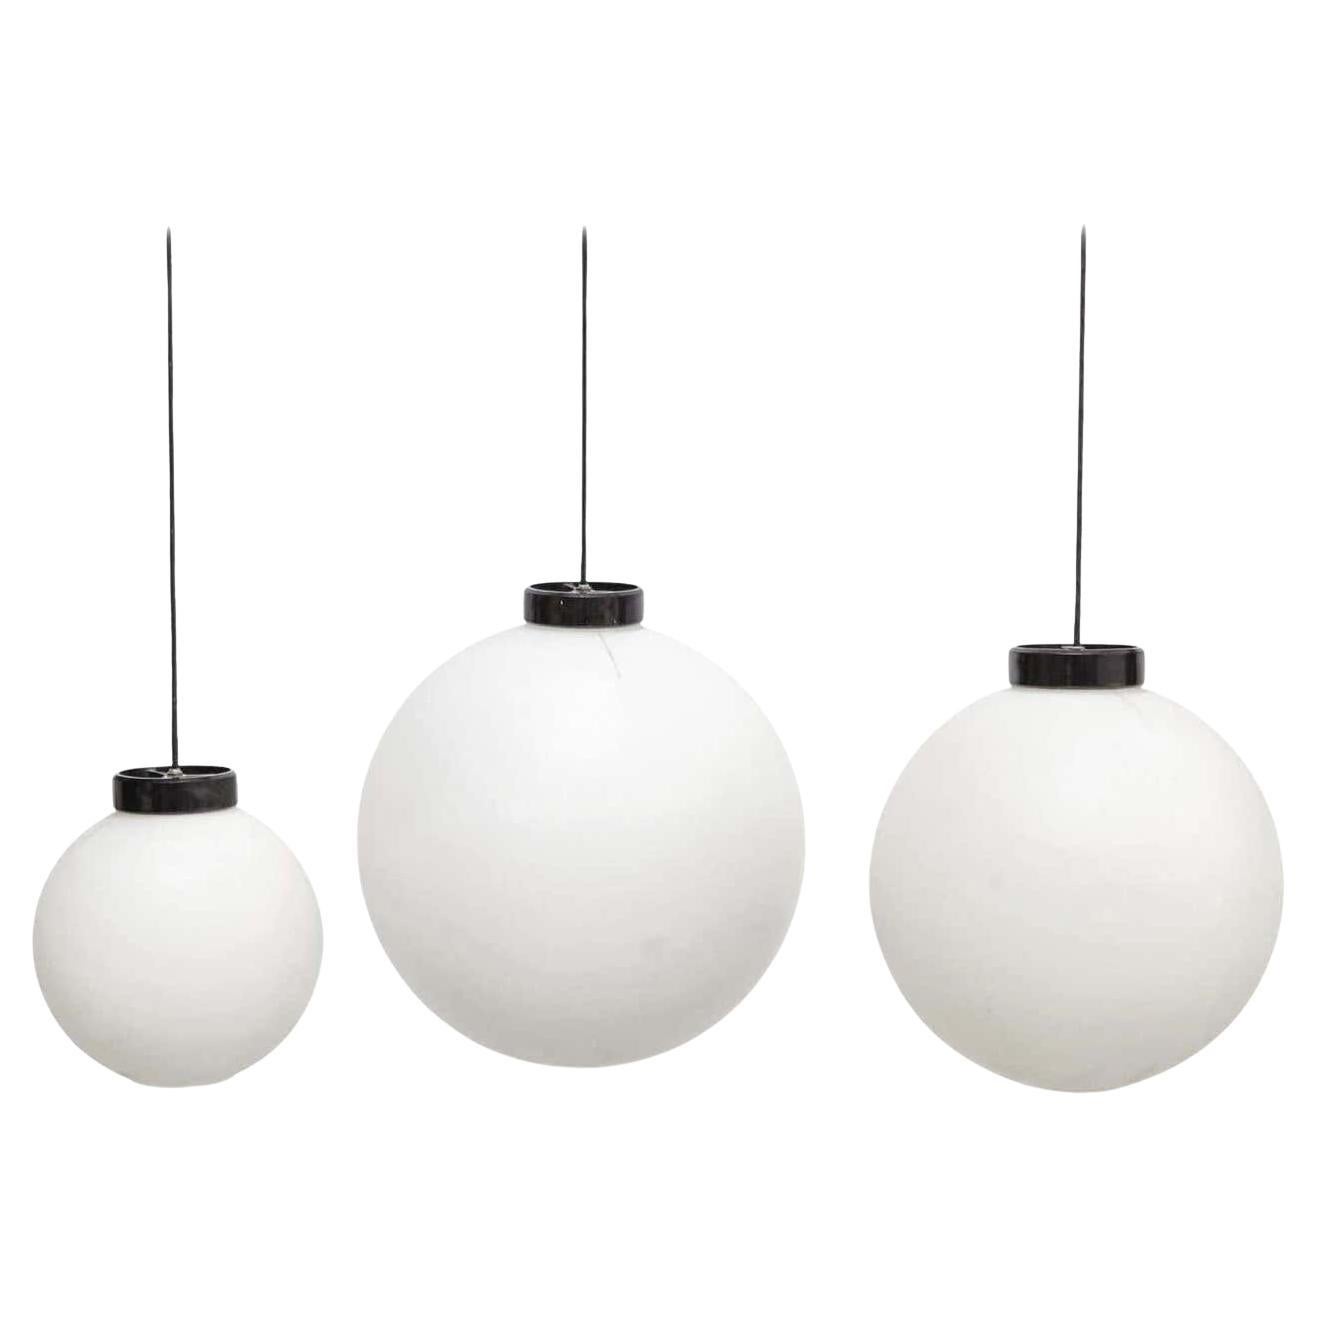 Set of Three White Pending Lamps by Miguel Mila for Tramo in Plastic, circa 1970